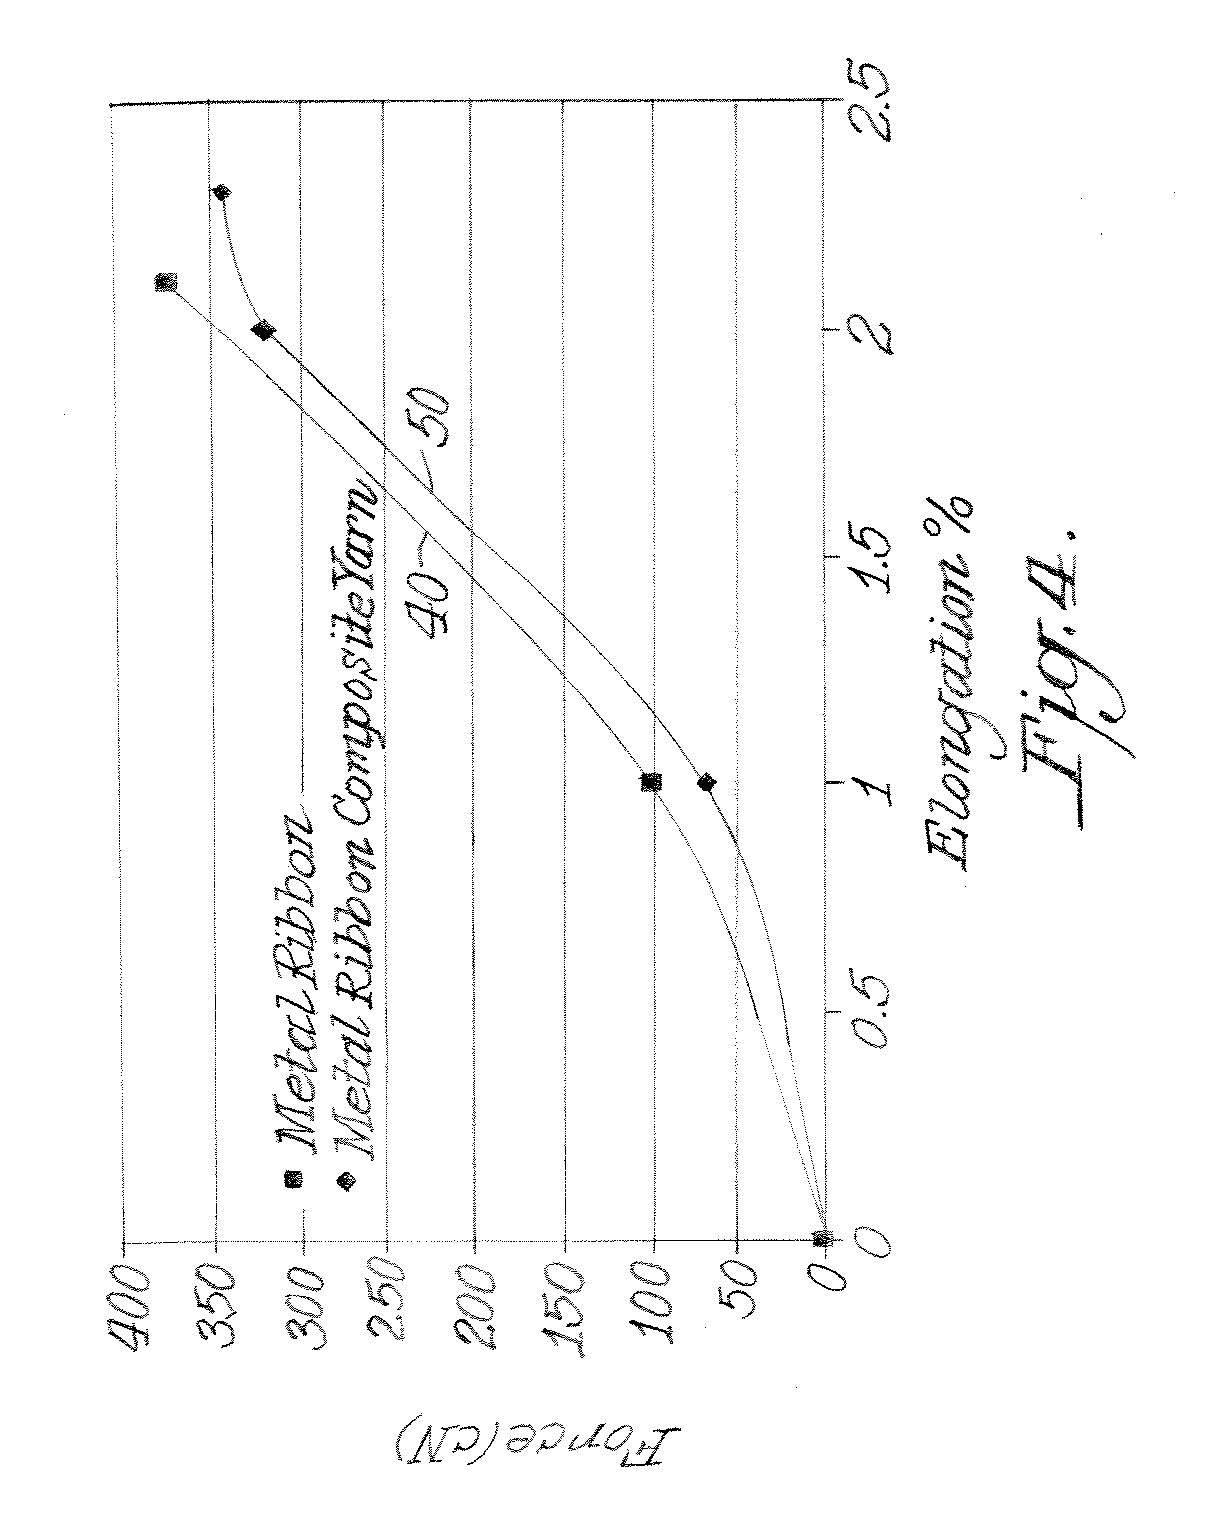 Energy active composite yarn, methods for making the same, and articles incorporating the same